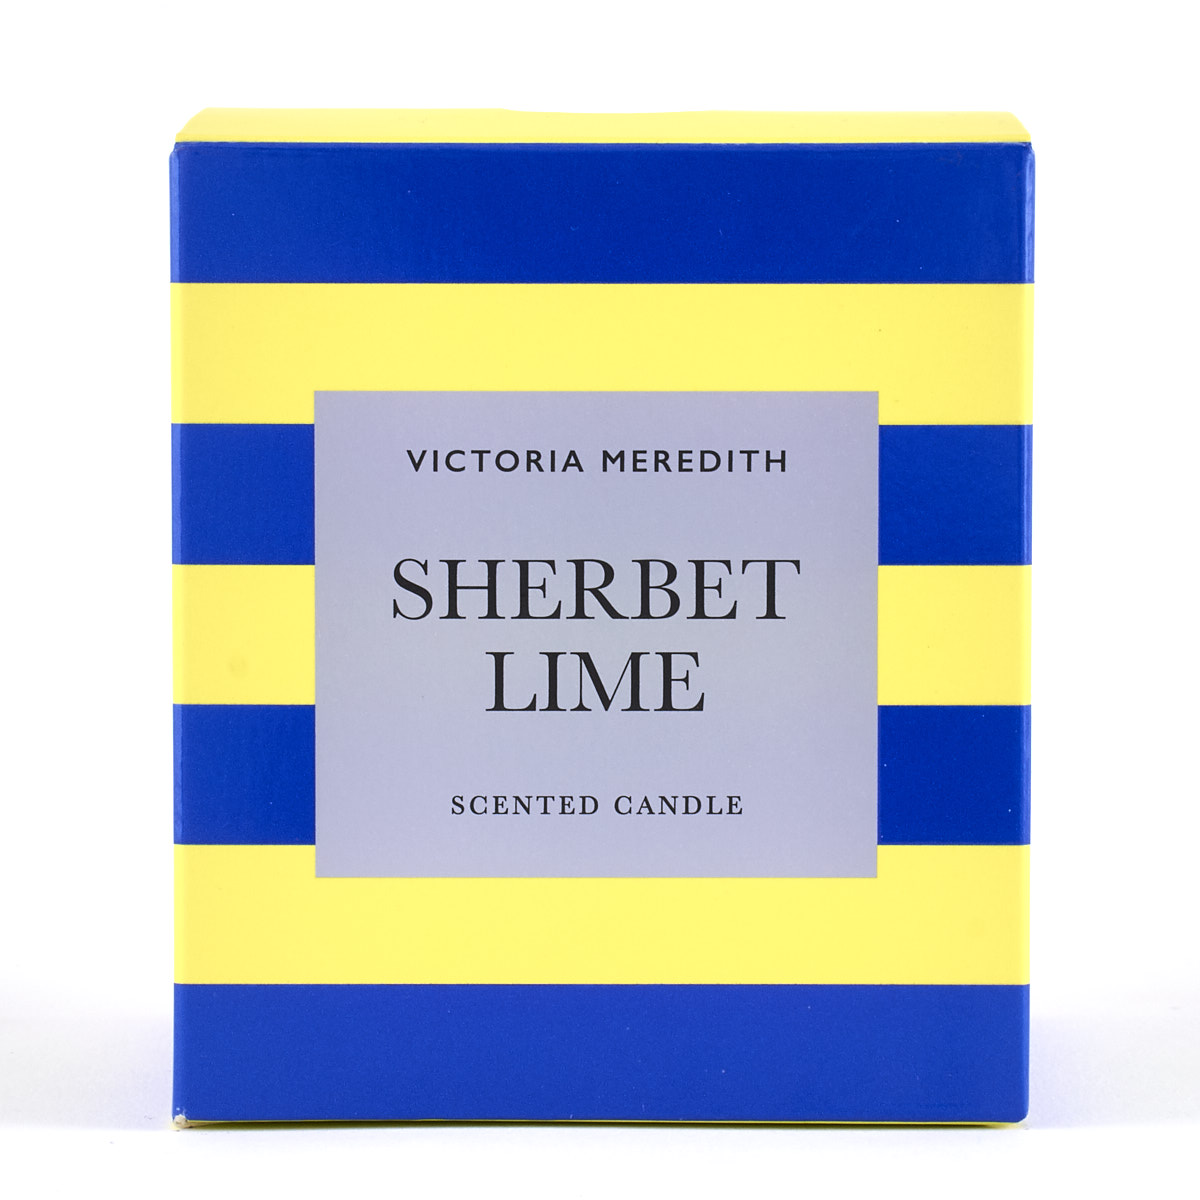 Victoria Meredith Sherbet Lime Scented Candle